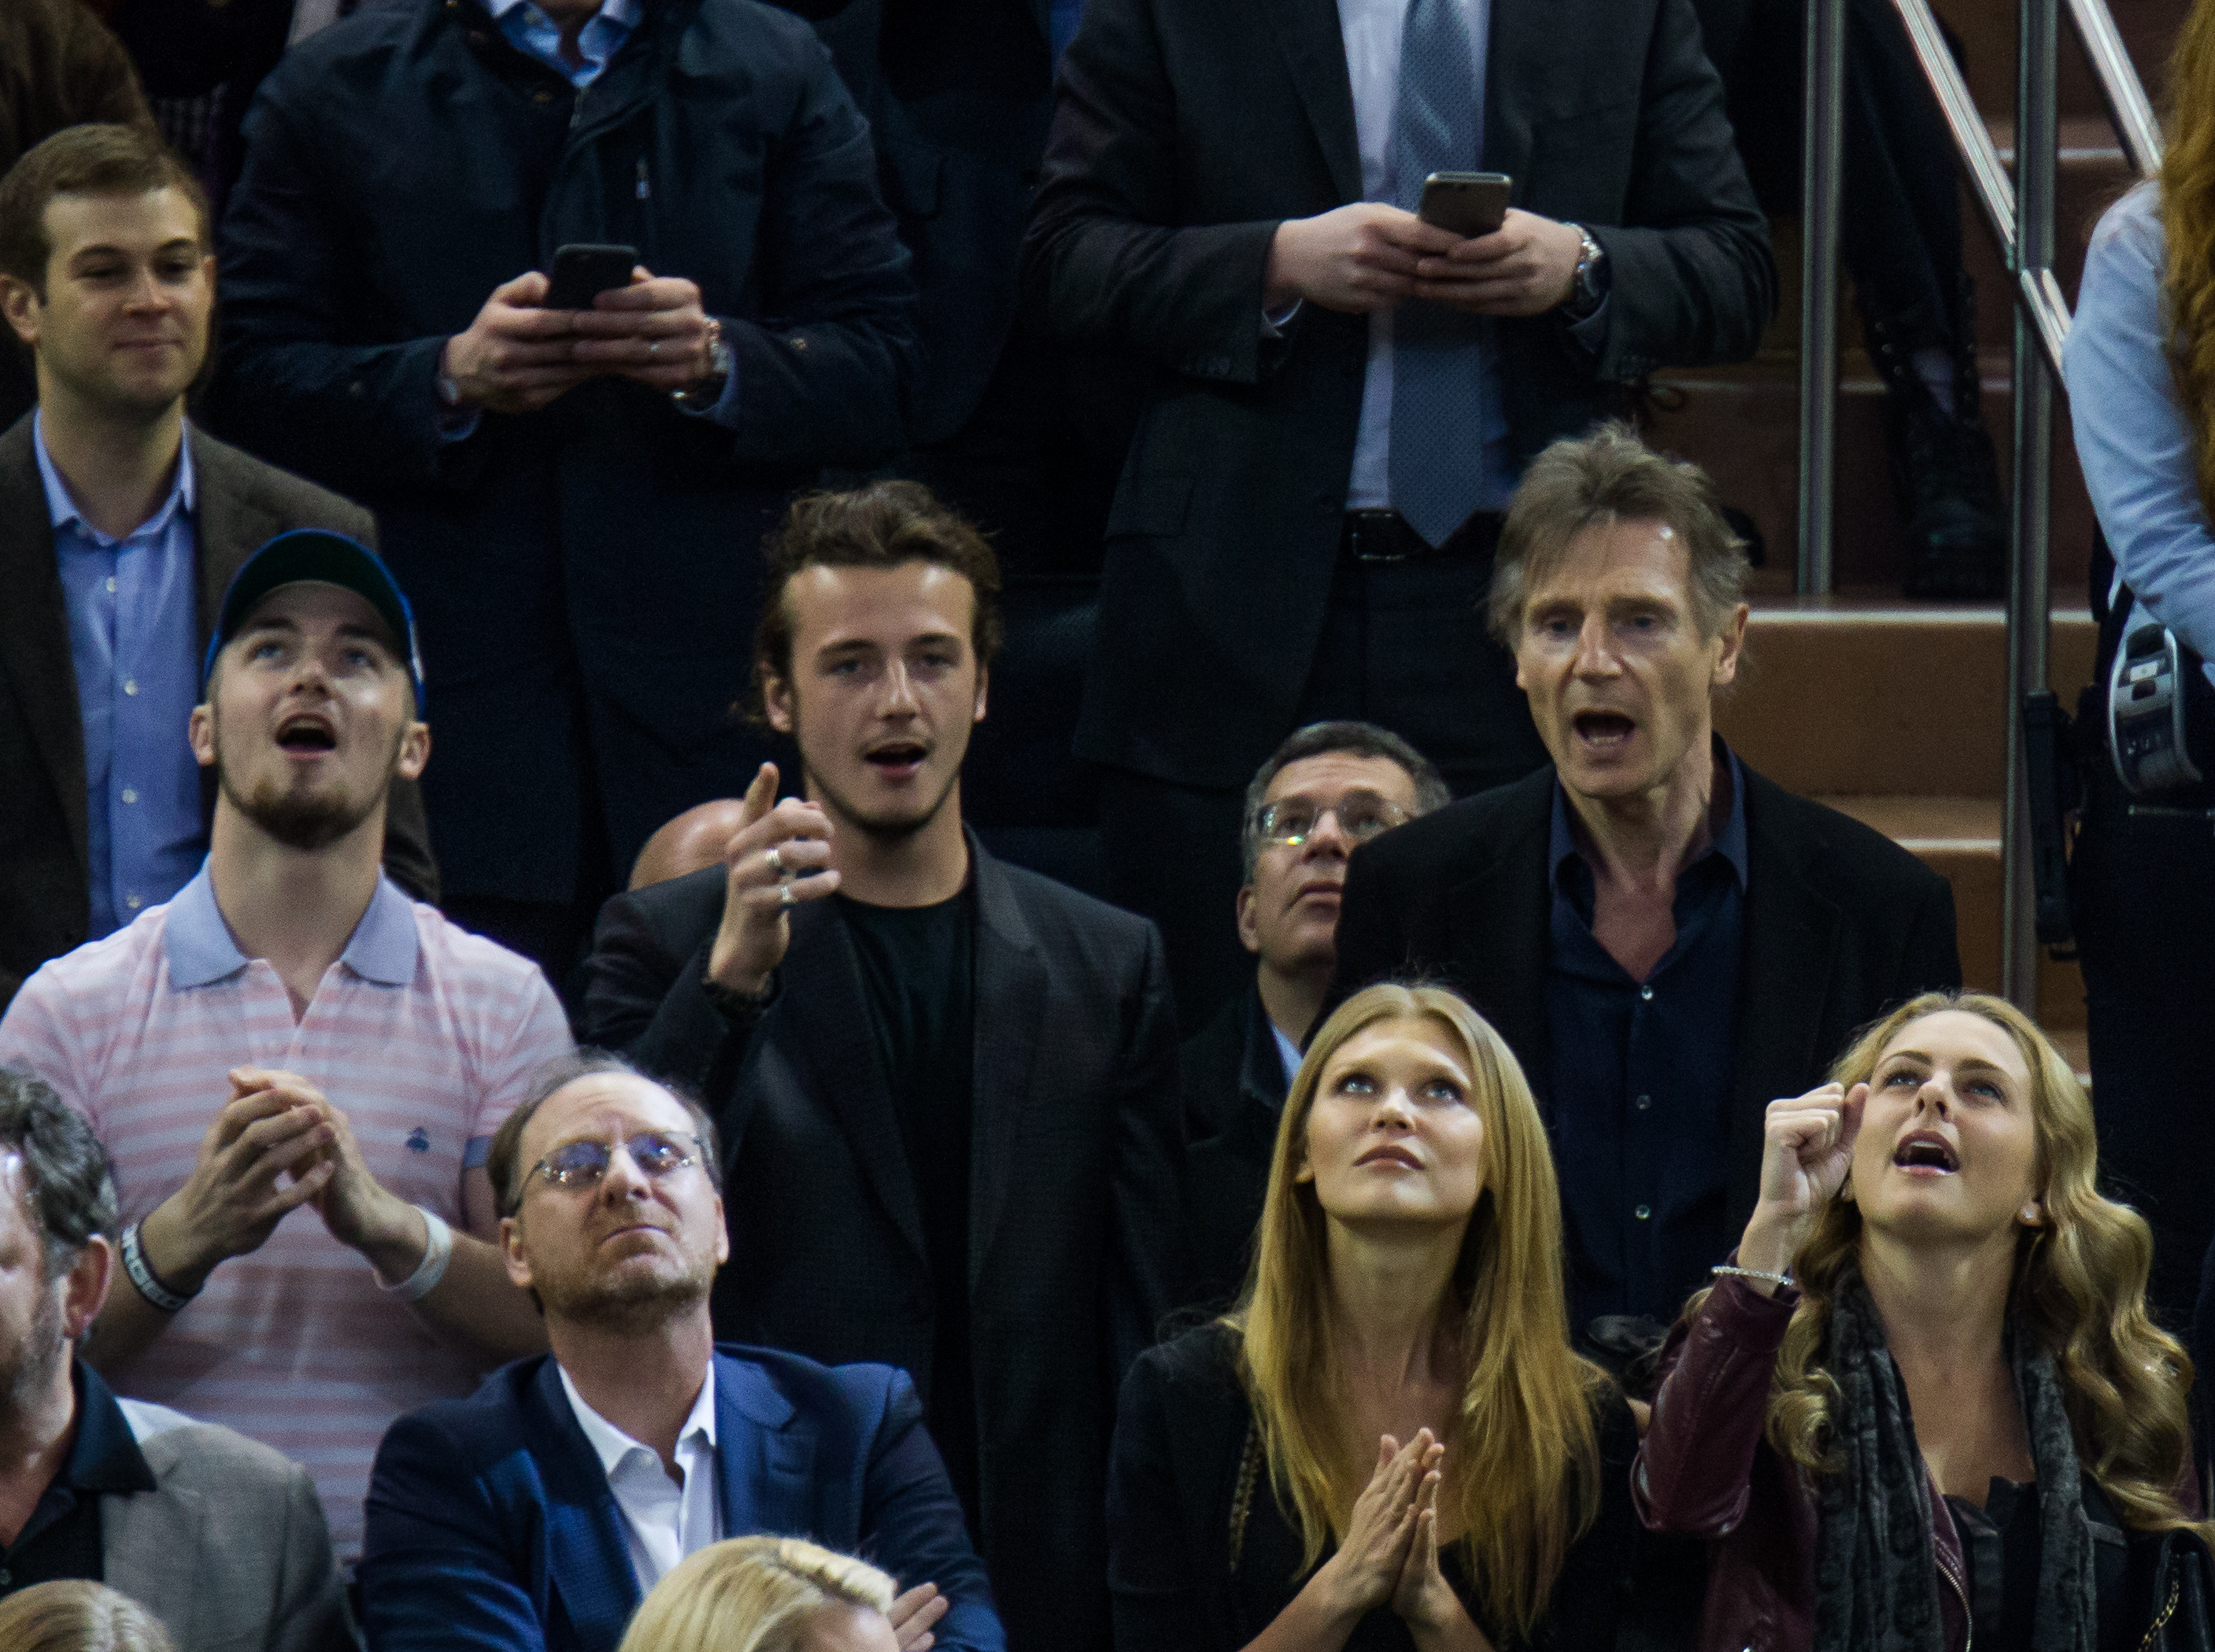 Liam Neeson and his sons, Daniel Neeson and Micheal Neeson attend New York Rangers Vs. Boston Bruins game at Madison Square Garden on March 23, 2016, in New York City | Source: Getty Images